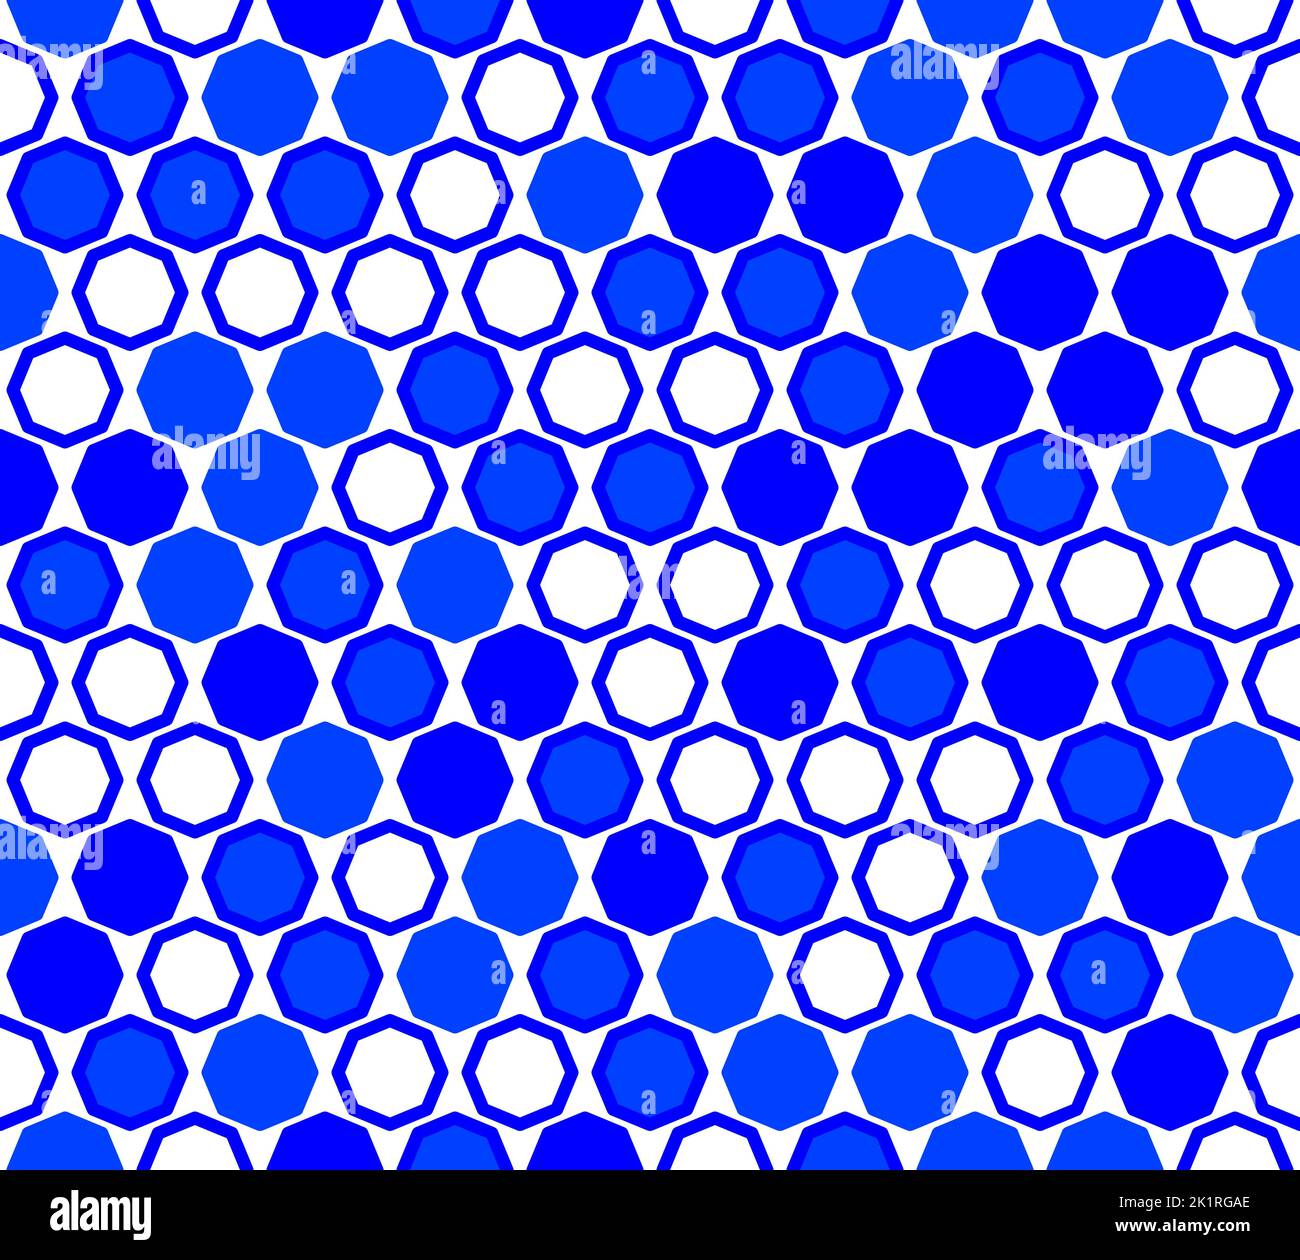 Seamless abstract background texture. Vector illustration Stock Vector